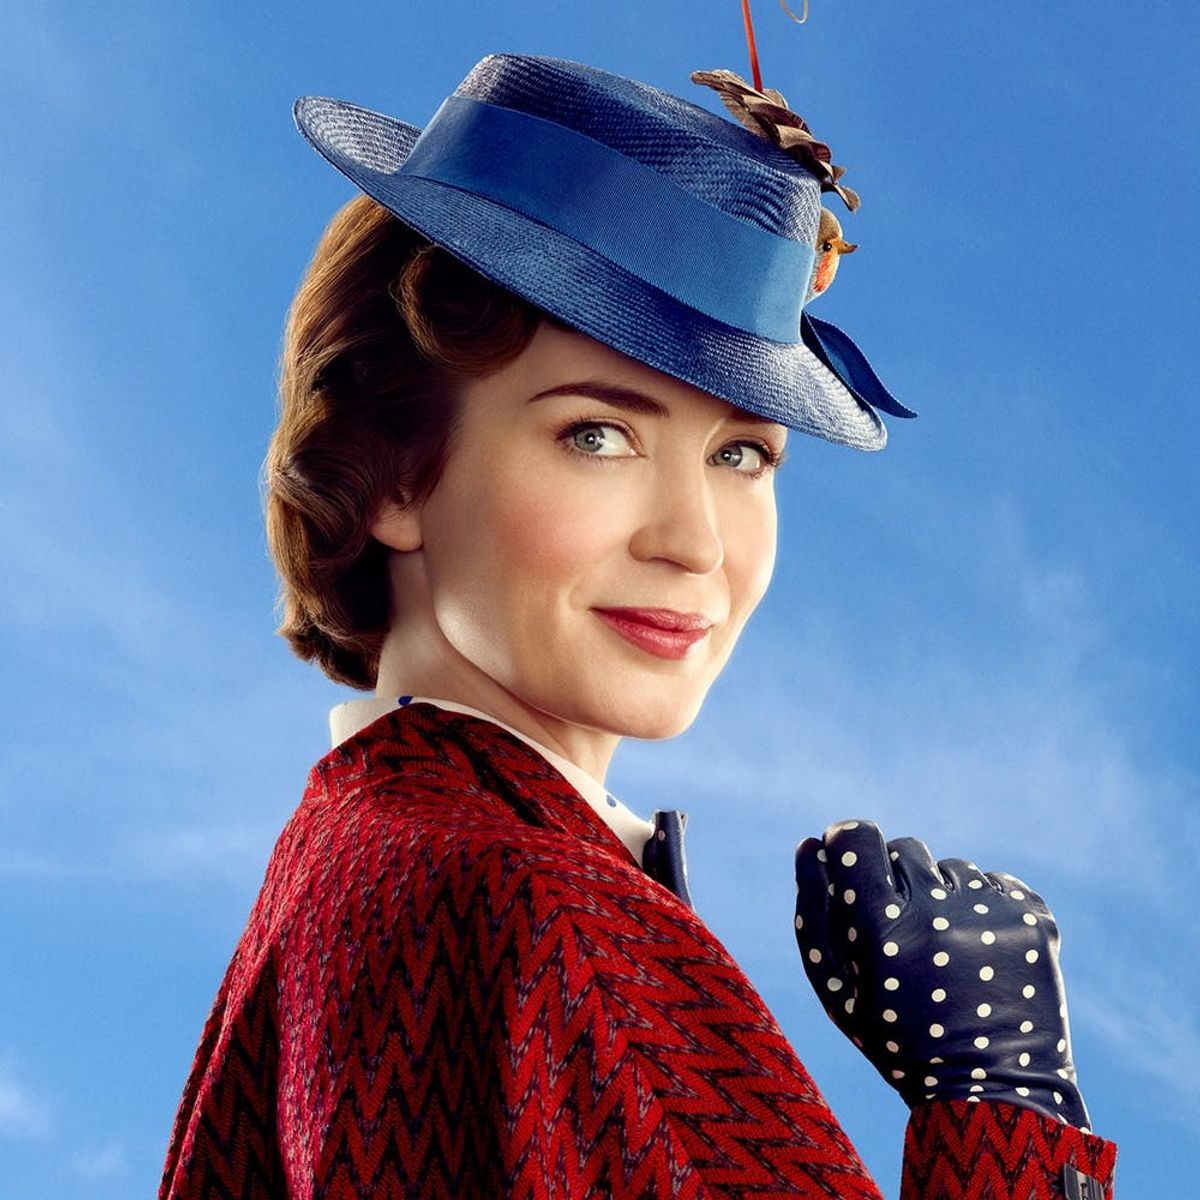 Disney Just Gave Us Our First Look at ‘Mary Poppins Returns’